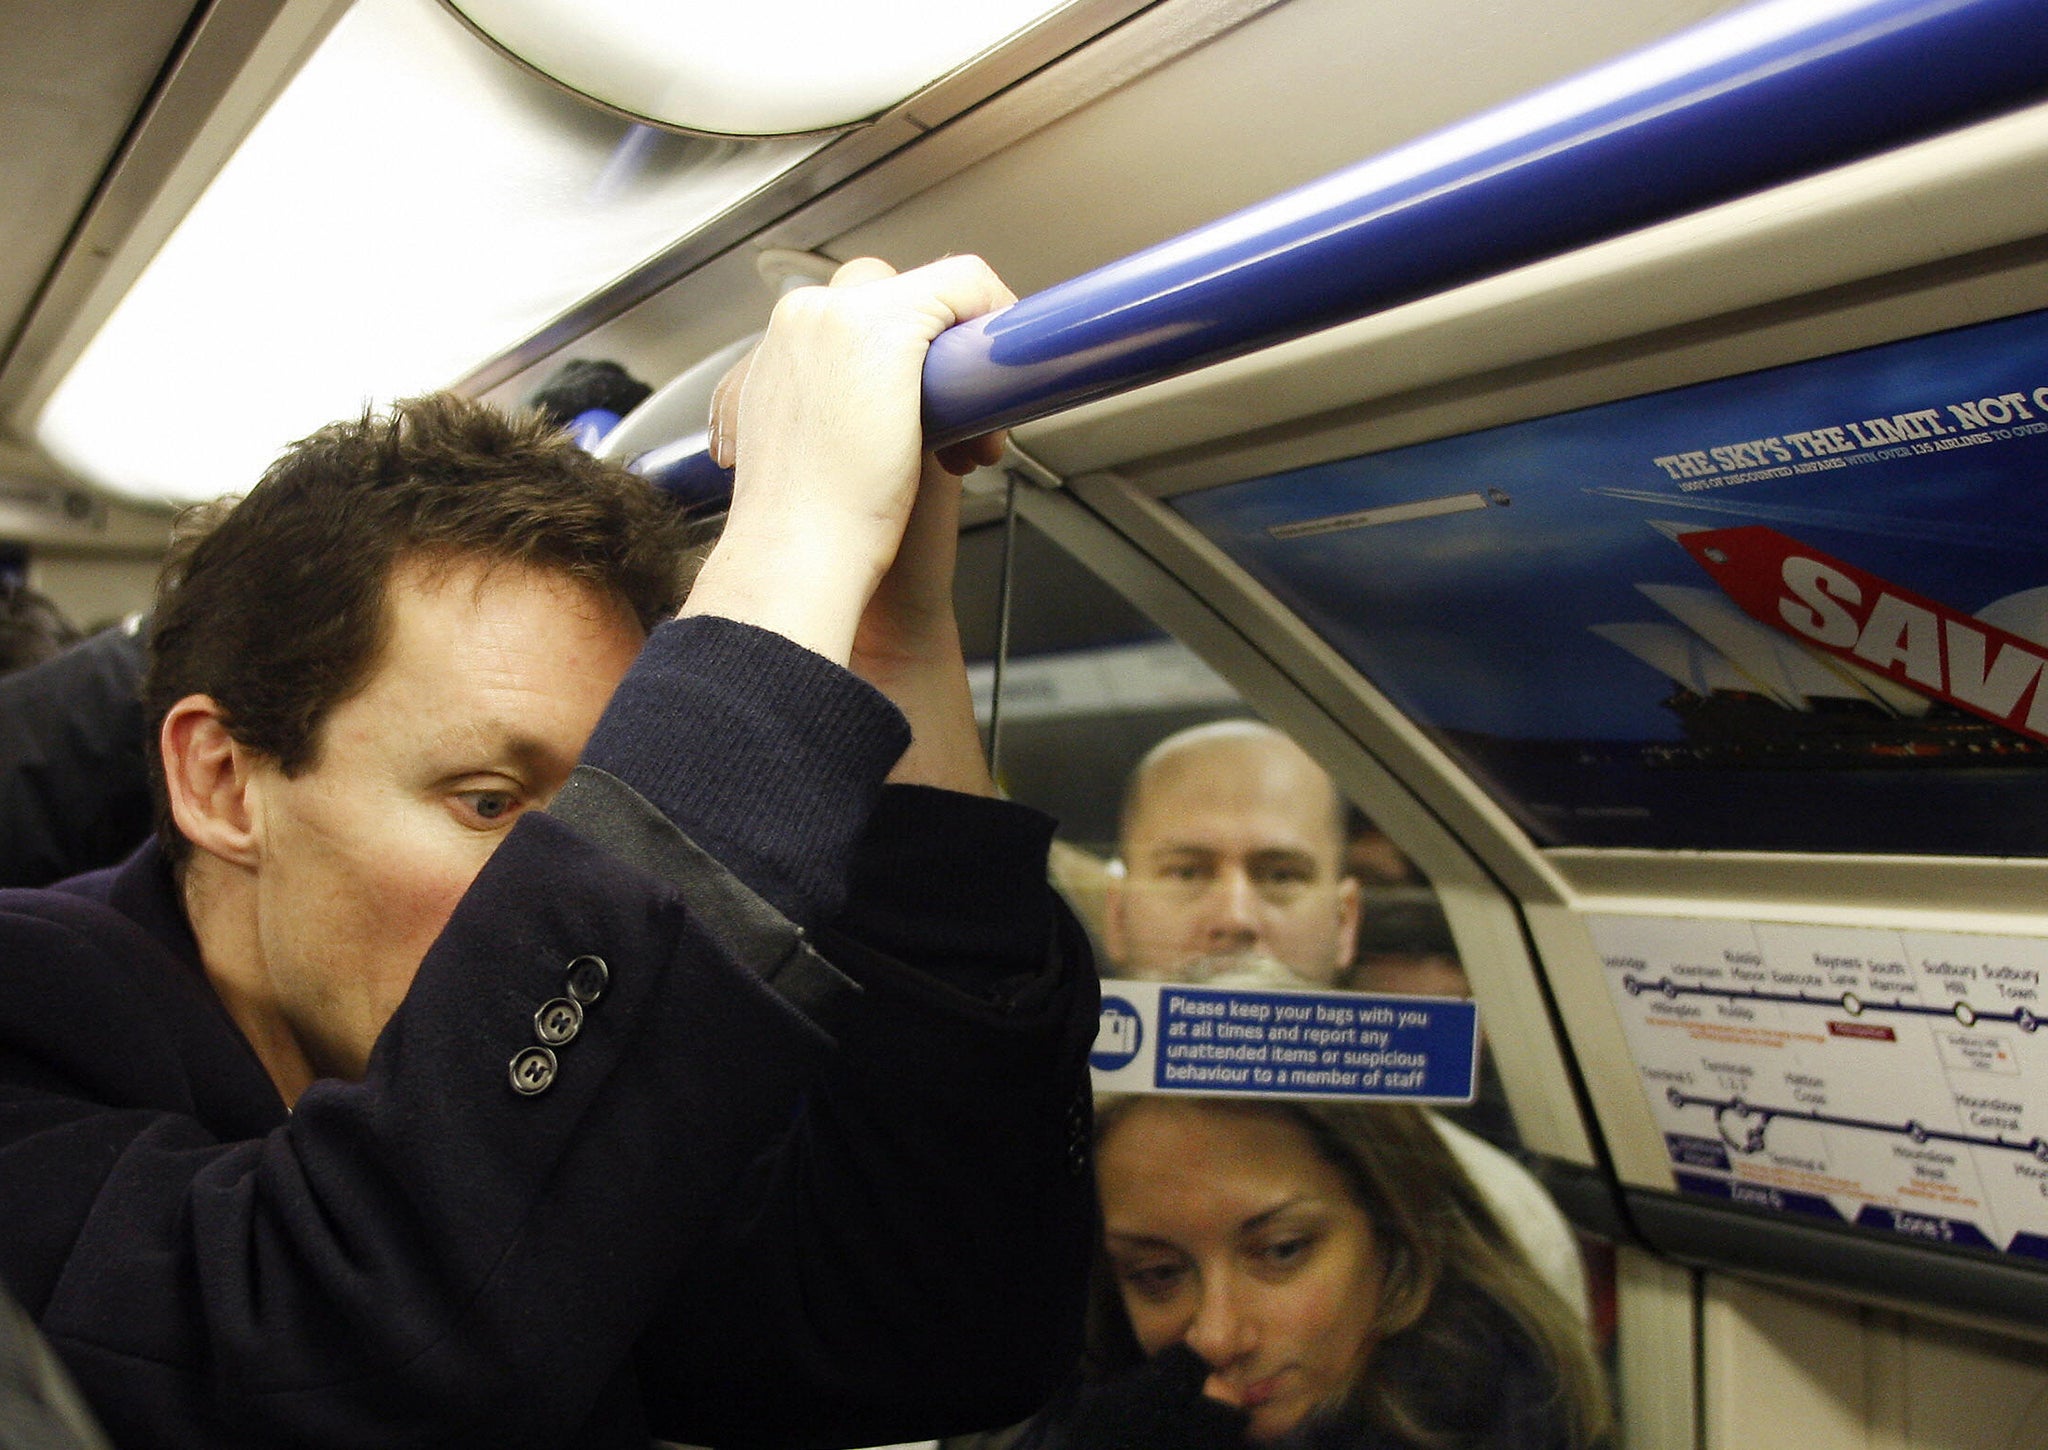 A man hangs onto a rail on the London Underground